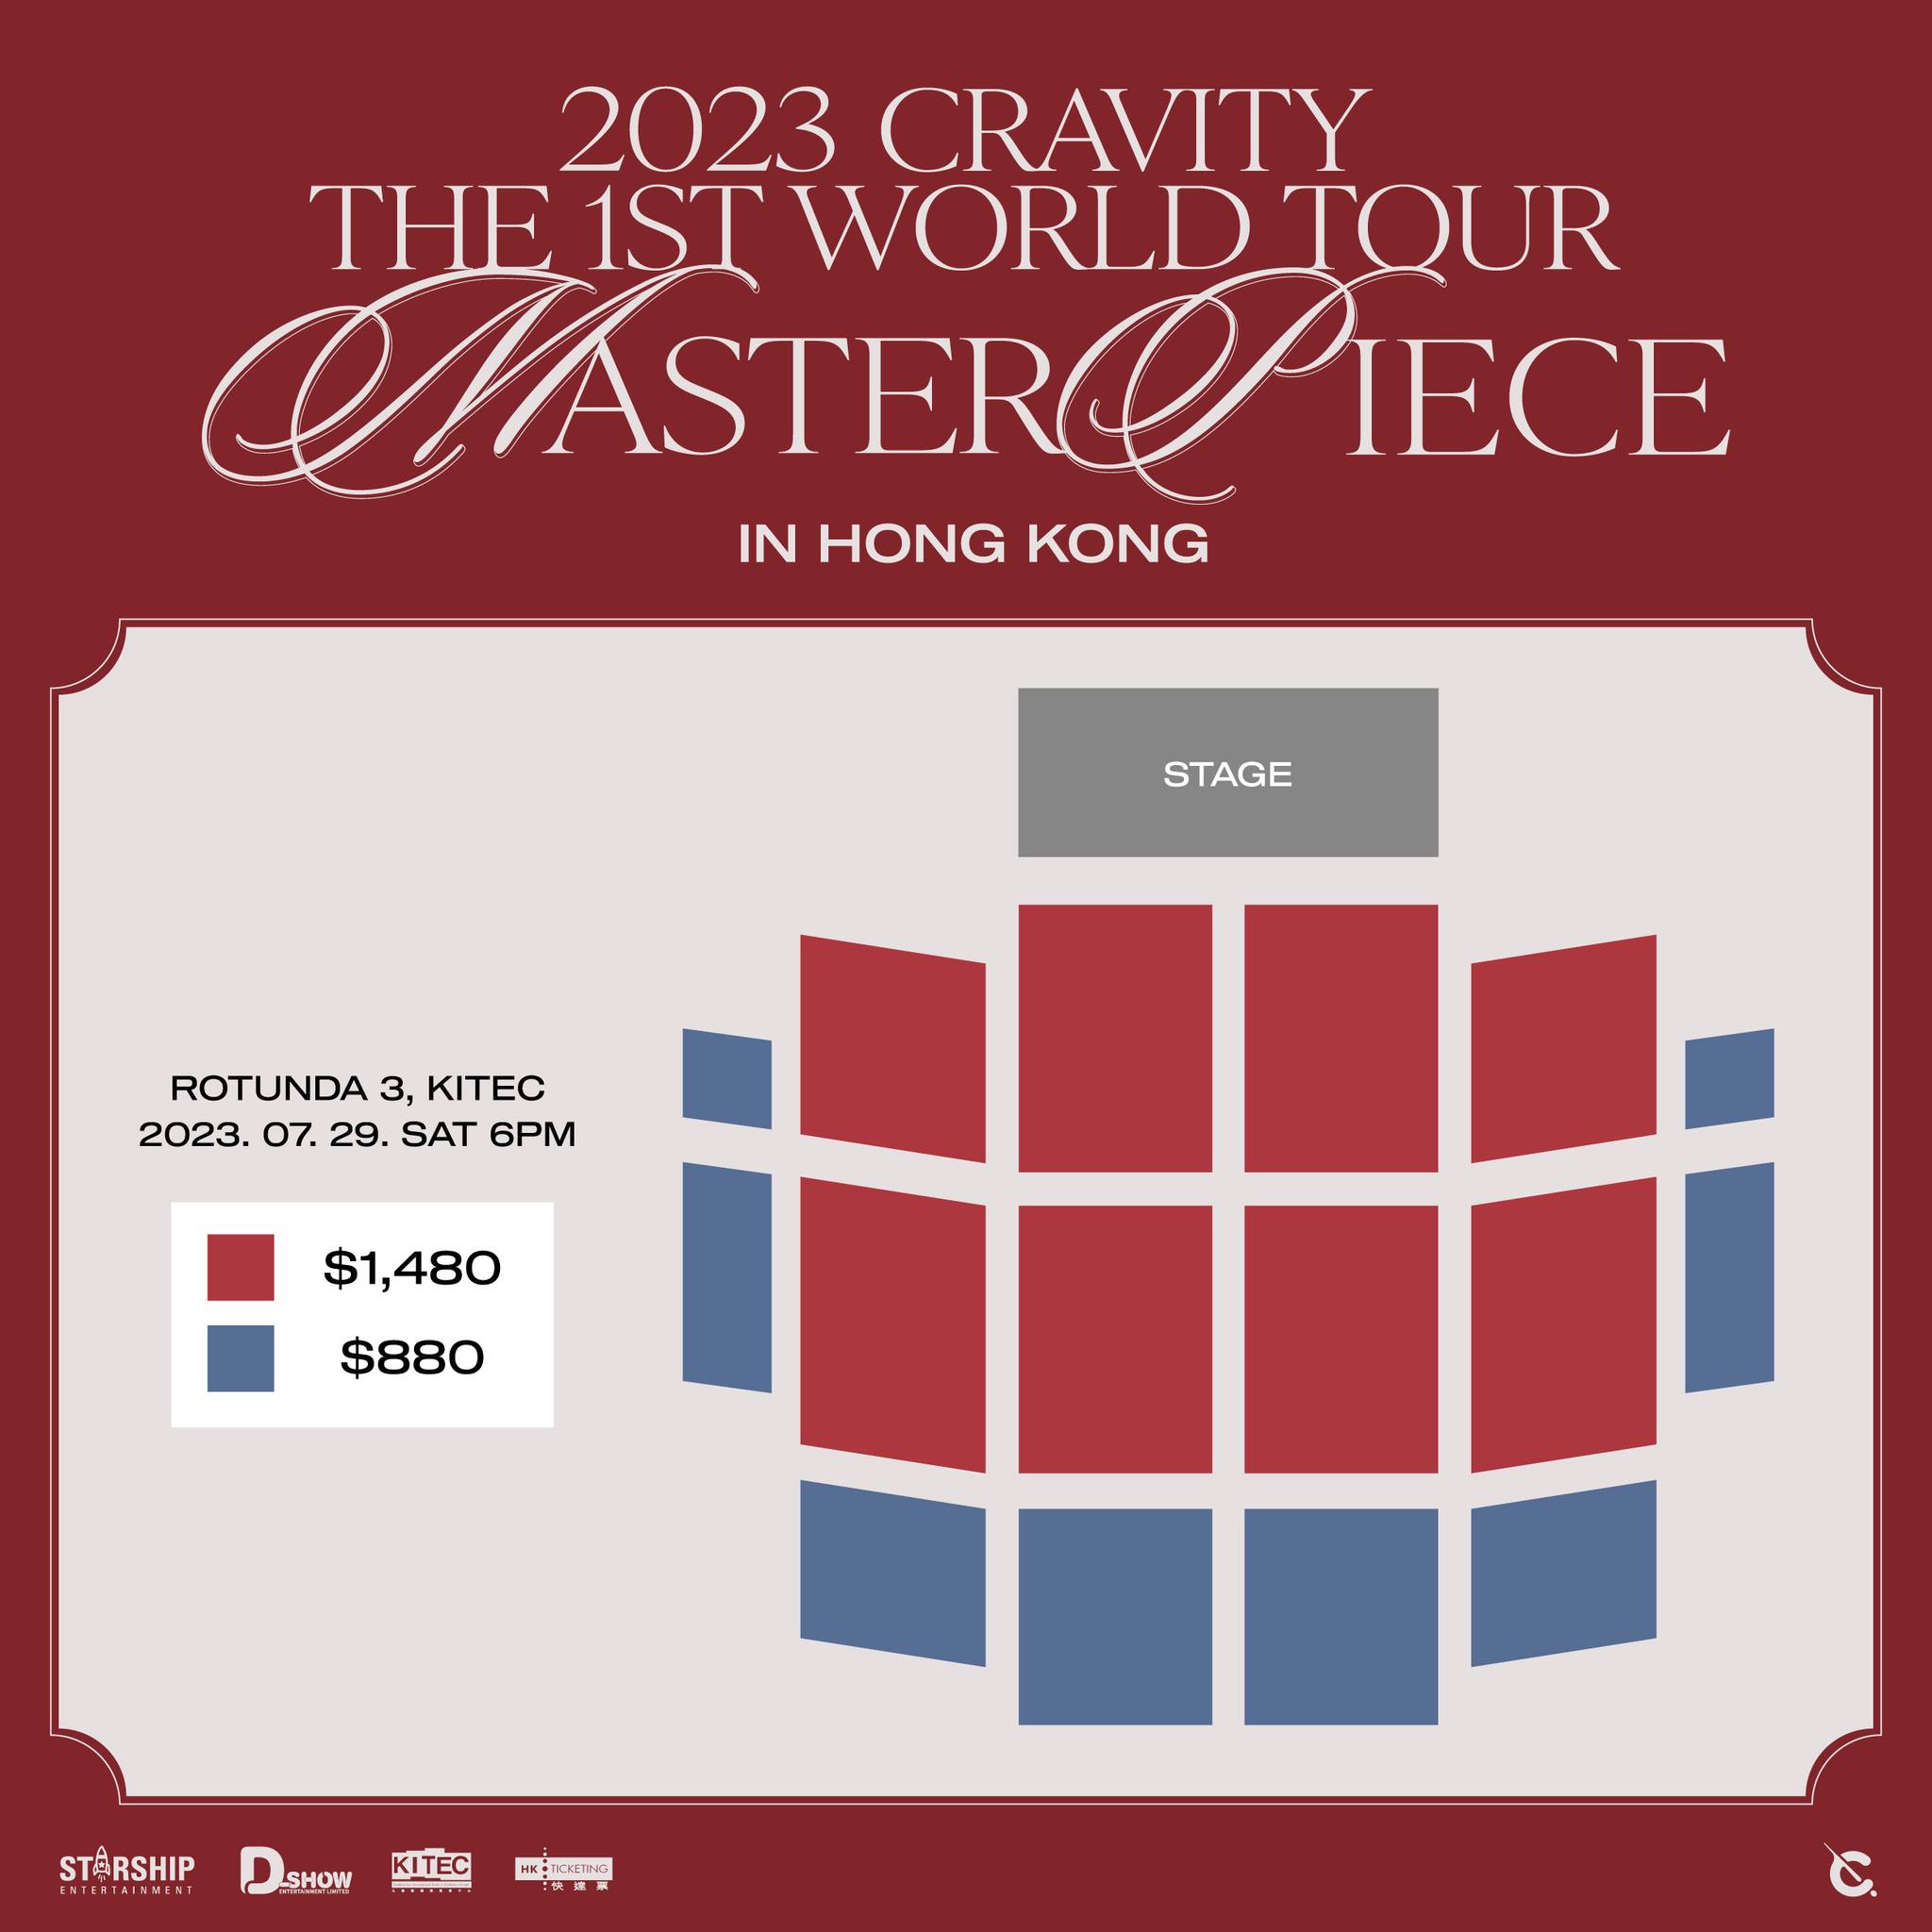 CRAVITY THE 1ST WORLD TOUR 'MASTERPIECE' in Hong Kong